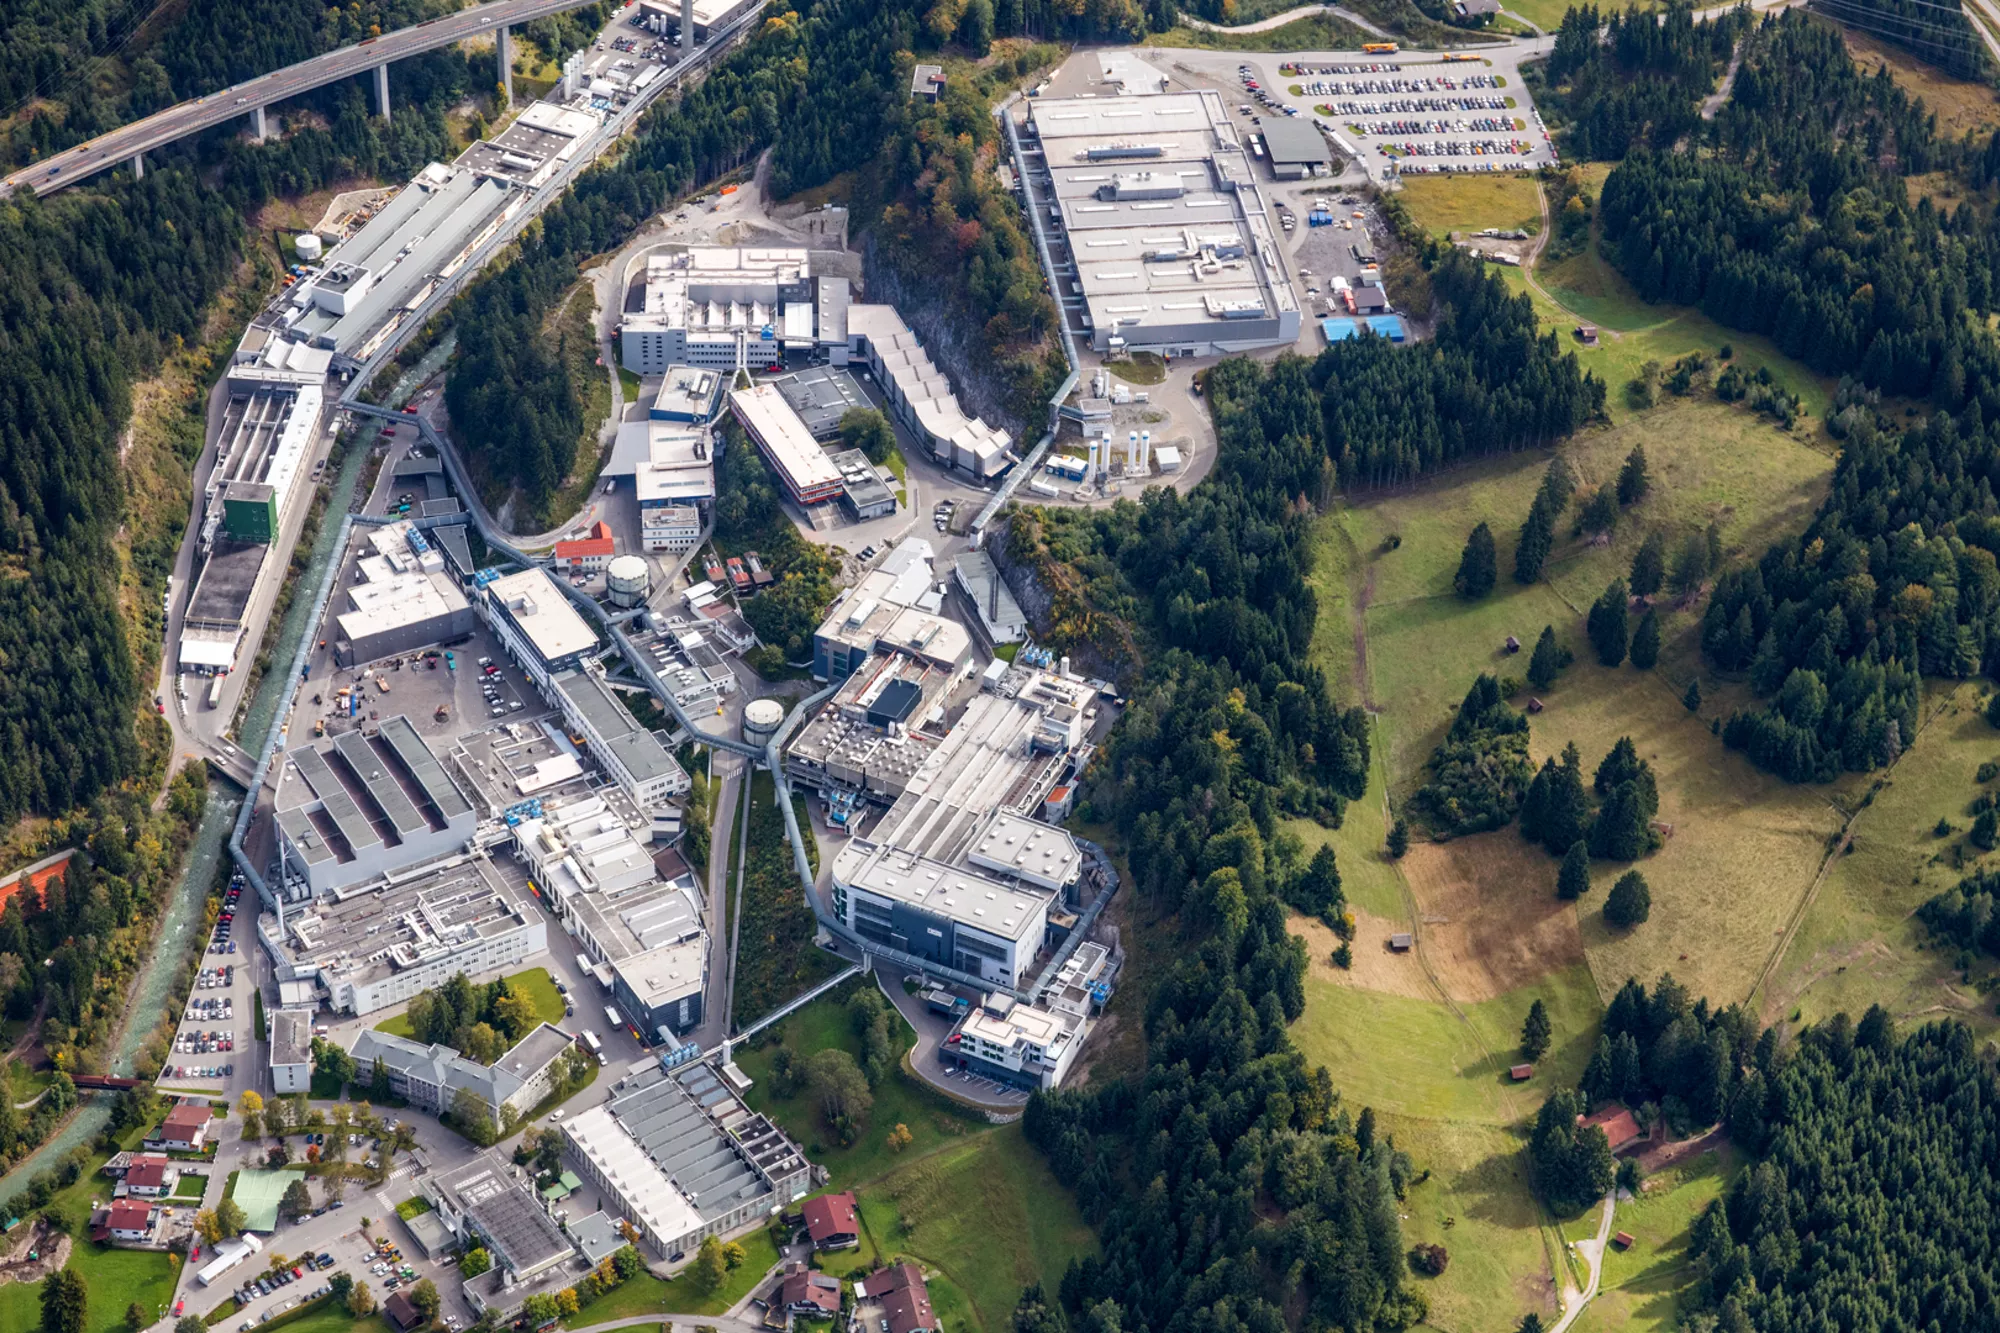 Aerial photo of Plansee Reutte site